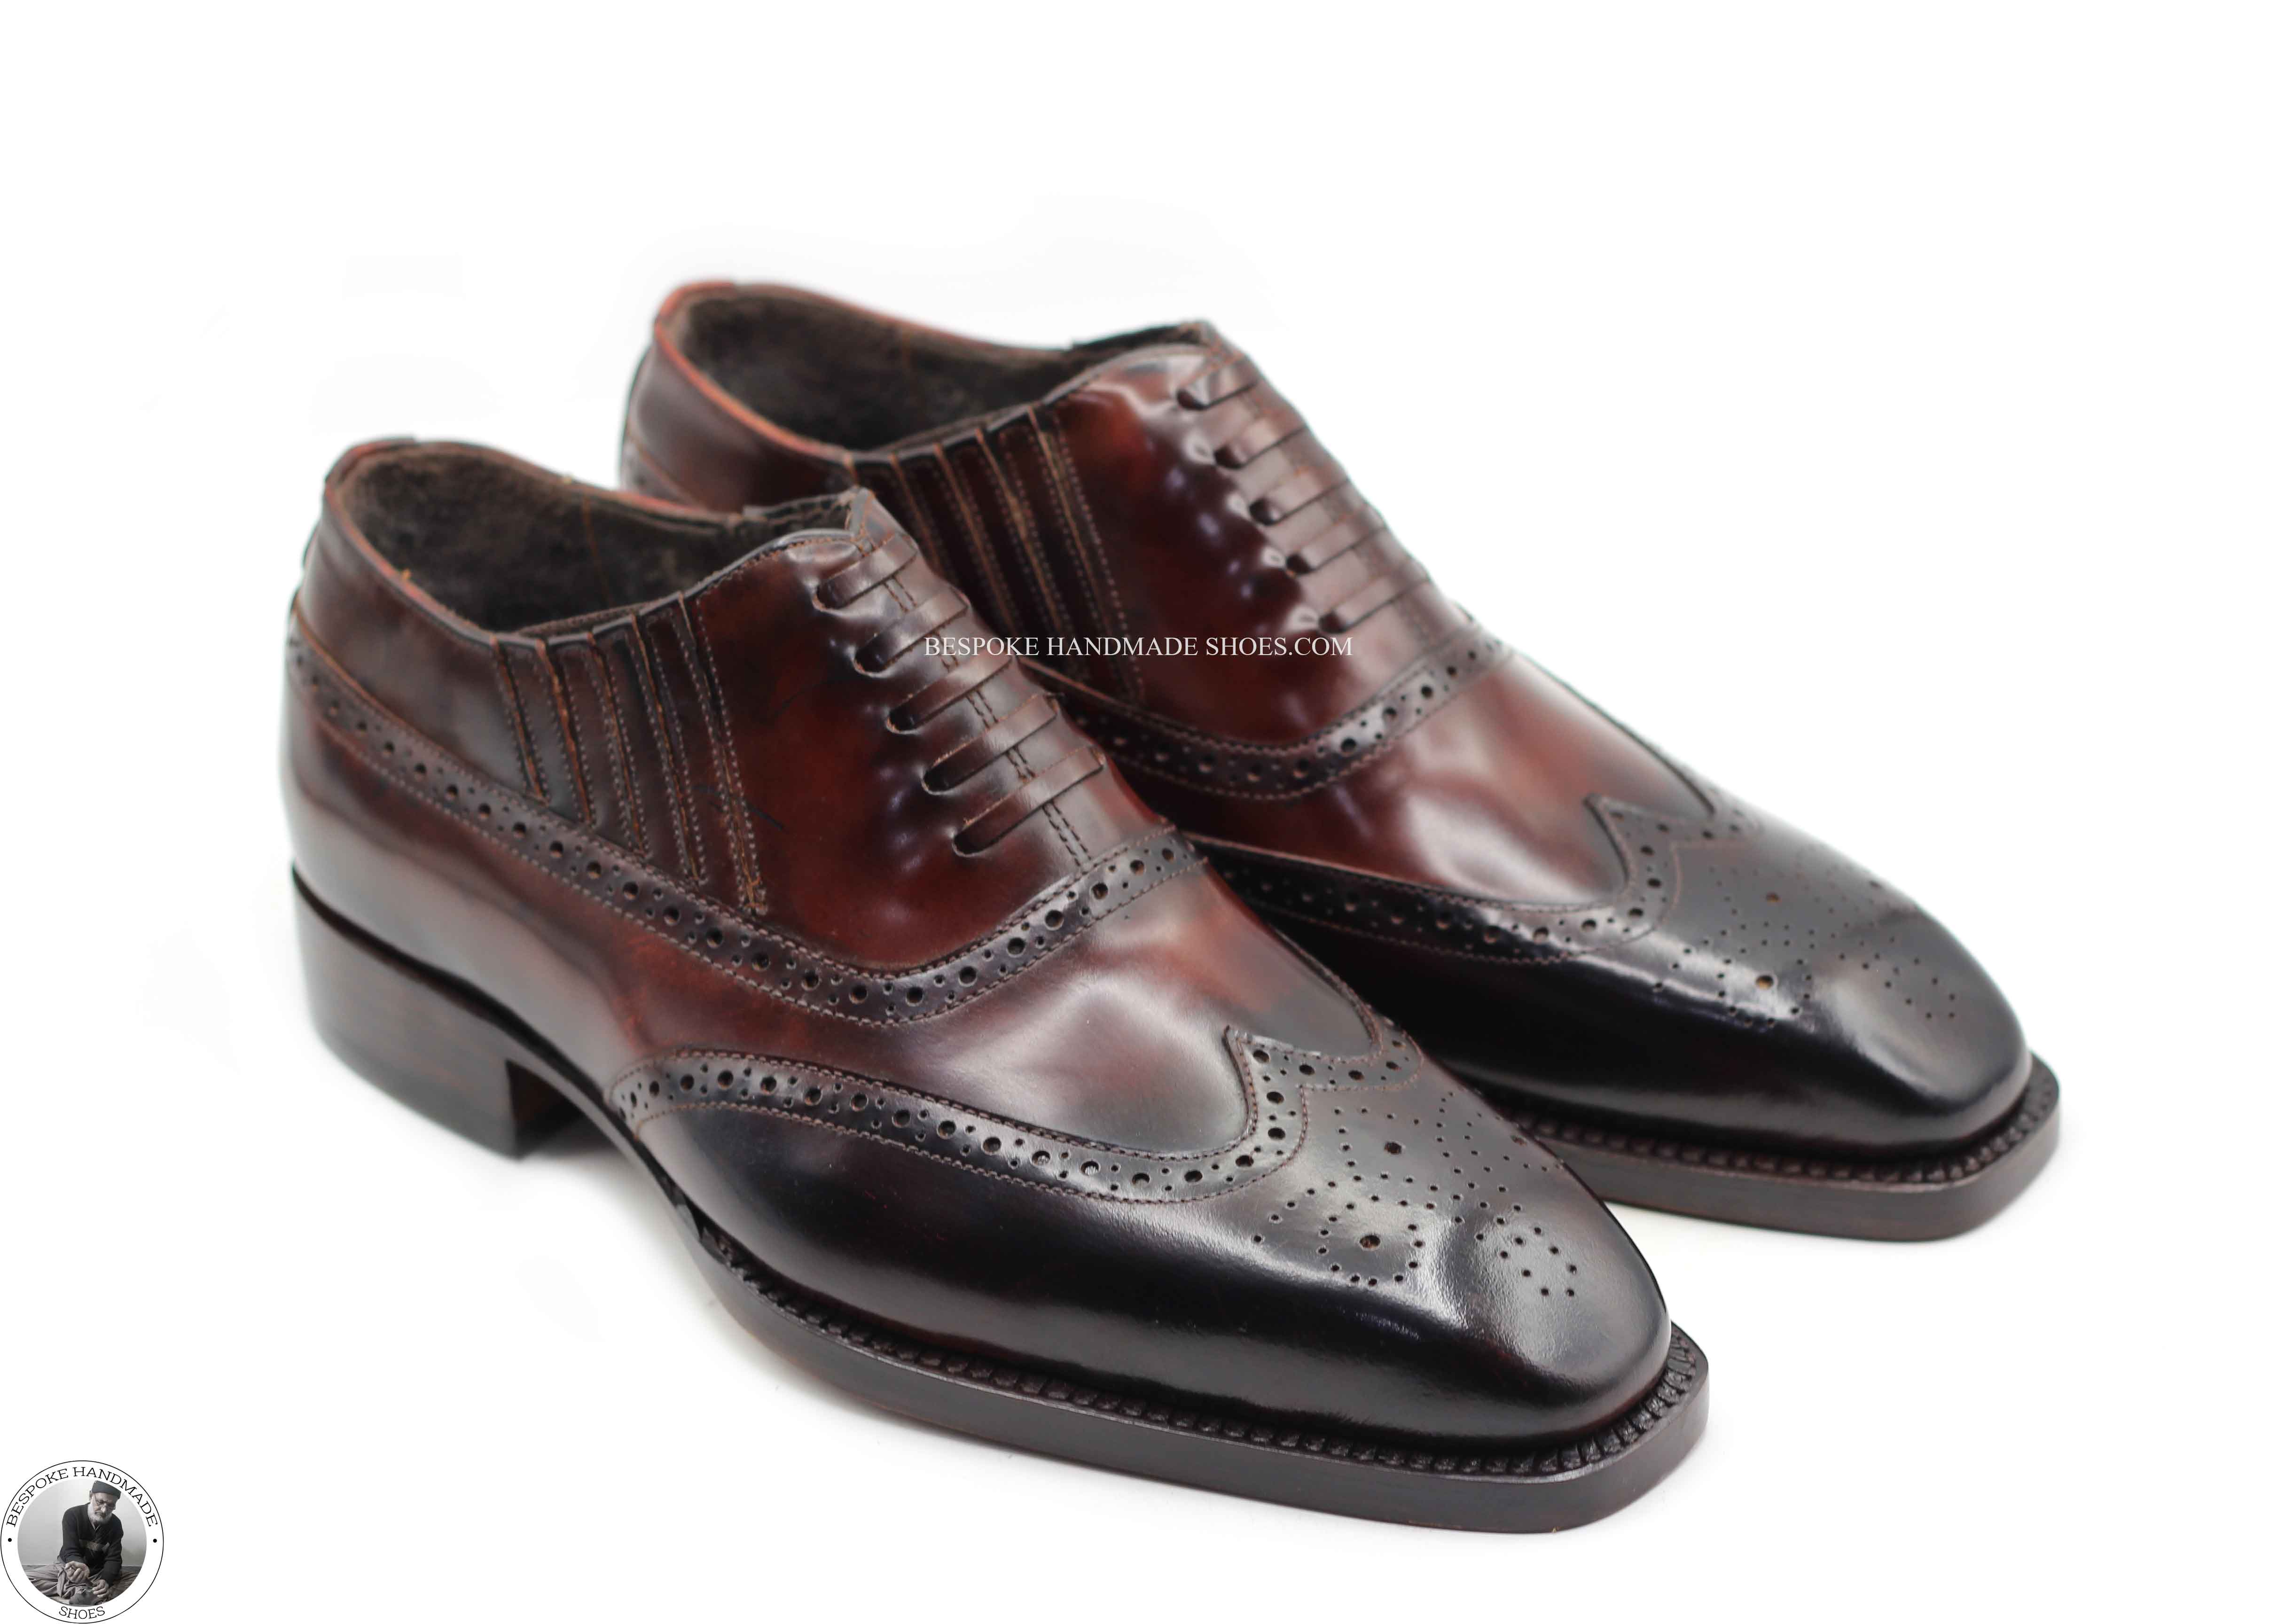 Bespoke Men's Handmade Maroon Leather Brown Shaded Toe Oxford Wingtip Brogue Party Shoes For Men's